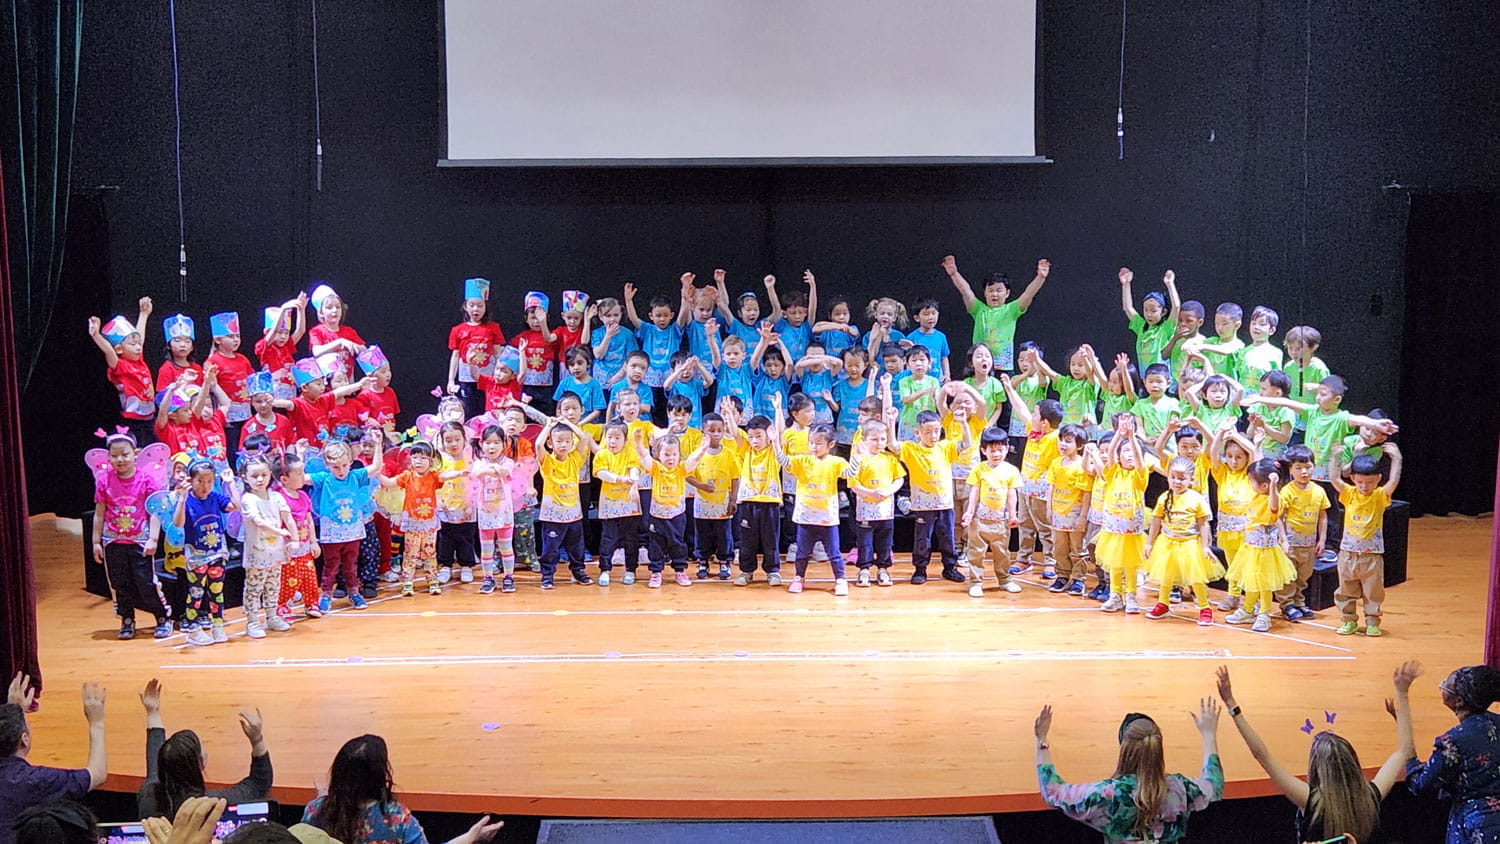 EYFS Spring Concert and Picnic 2023 - EYFS Spring Concert and Picnic 2023